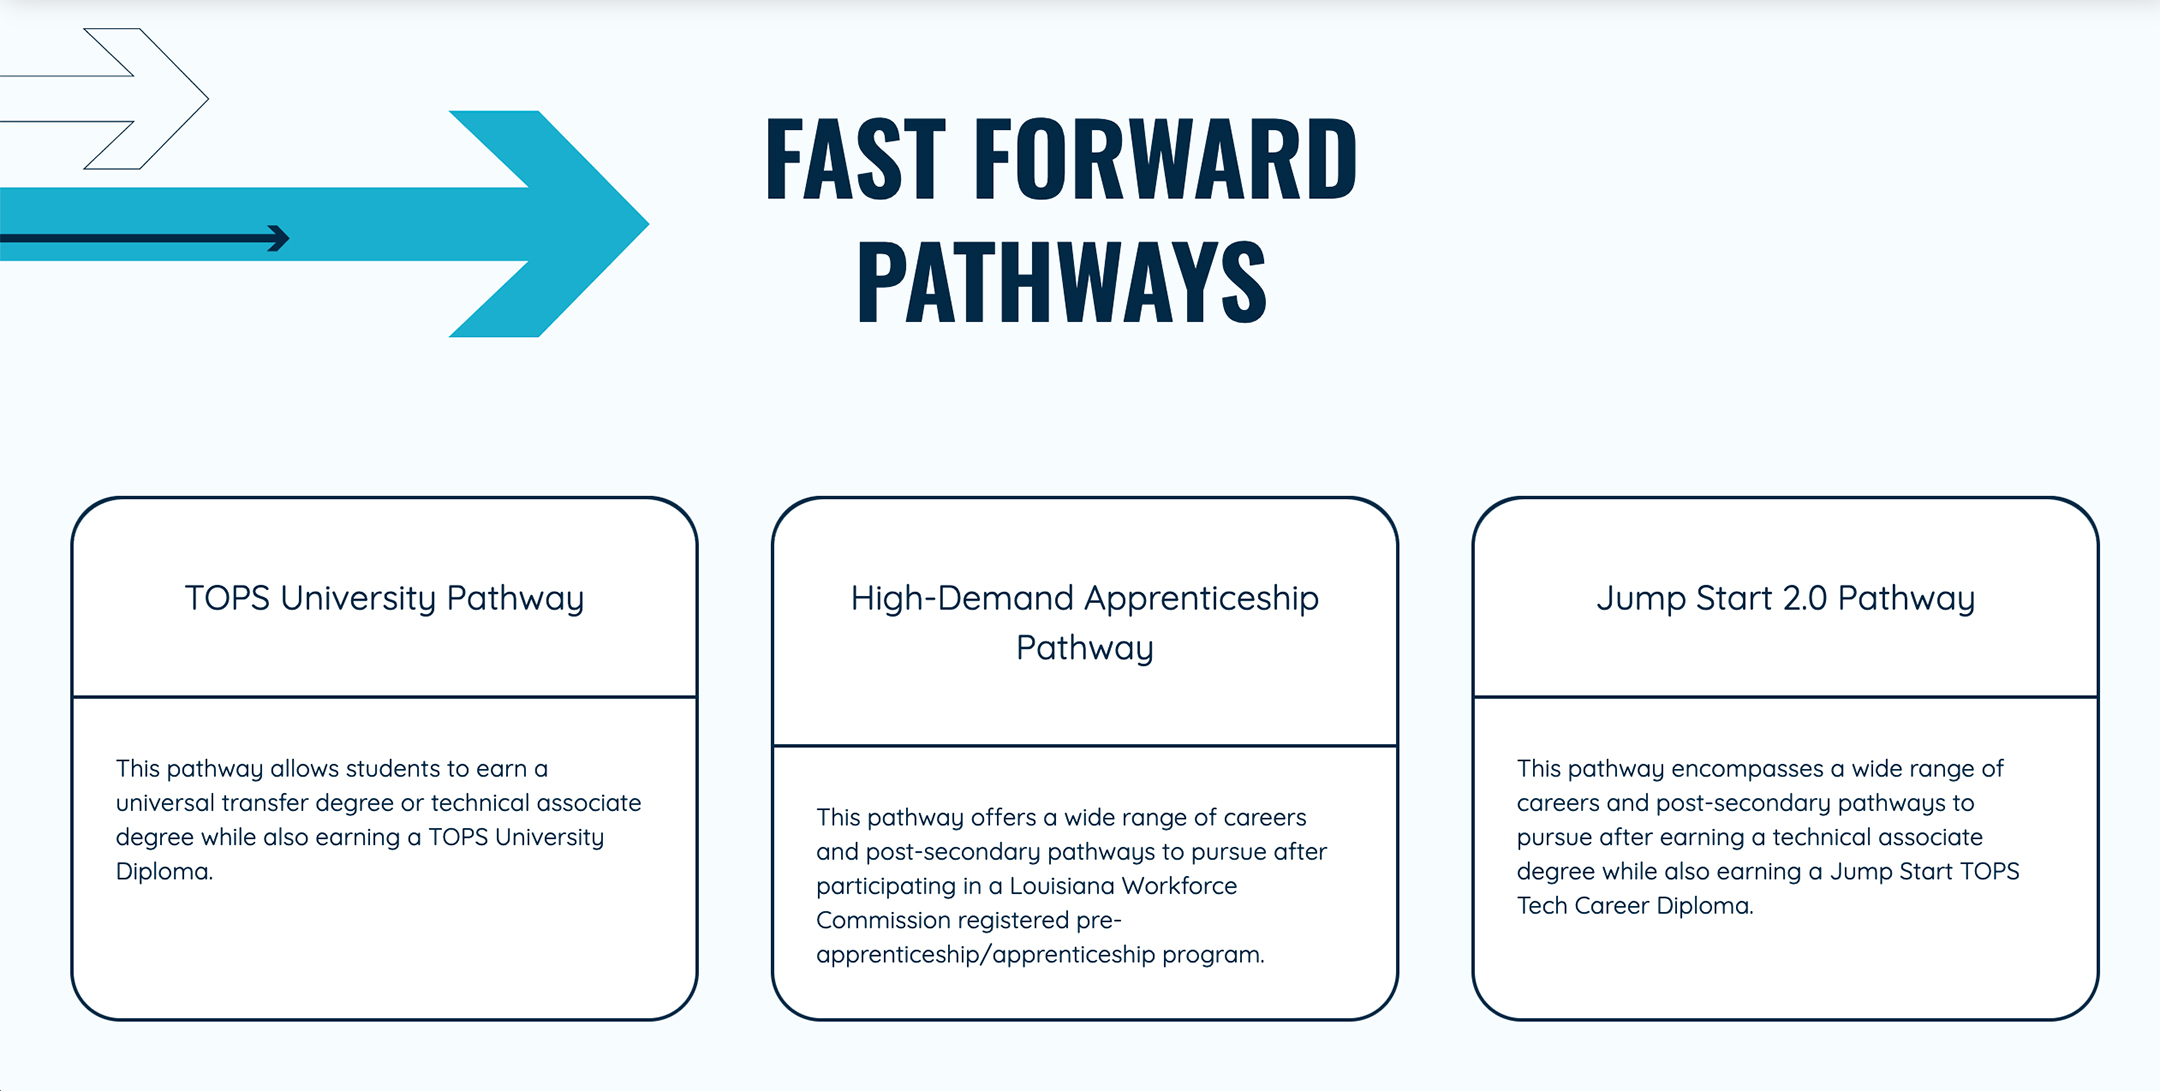 Graphic titled Fast Forward Pathways with three info boxes underneath: TOPS University Pathway, High-Demand Apprenticeship Pathway, and Jump Start 2.0 Pathway